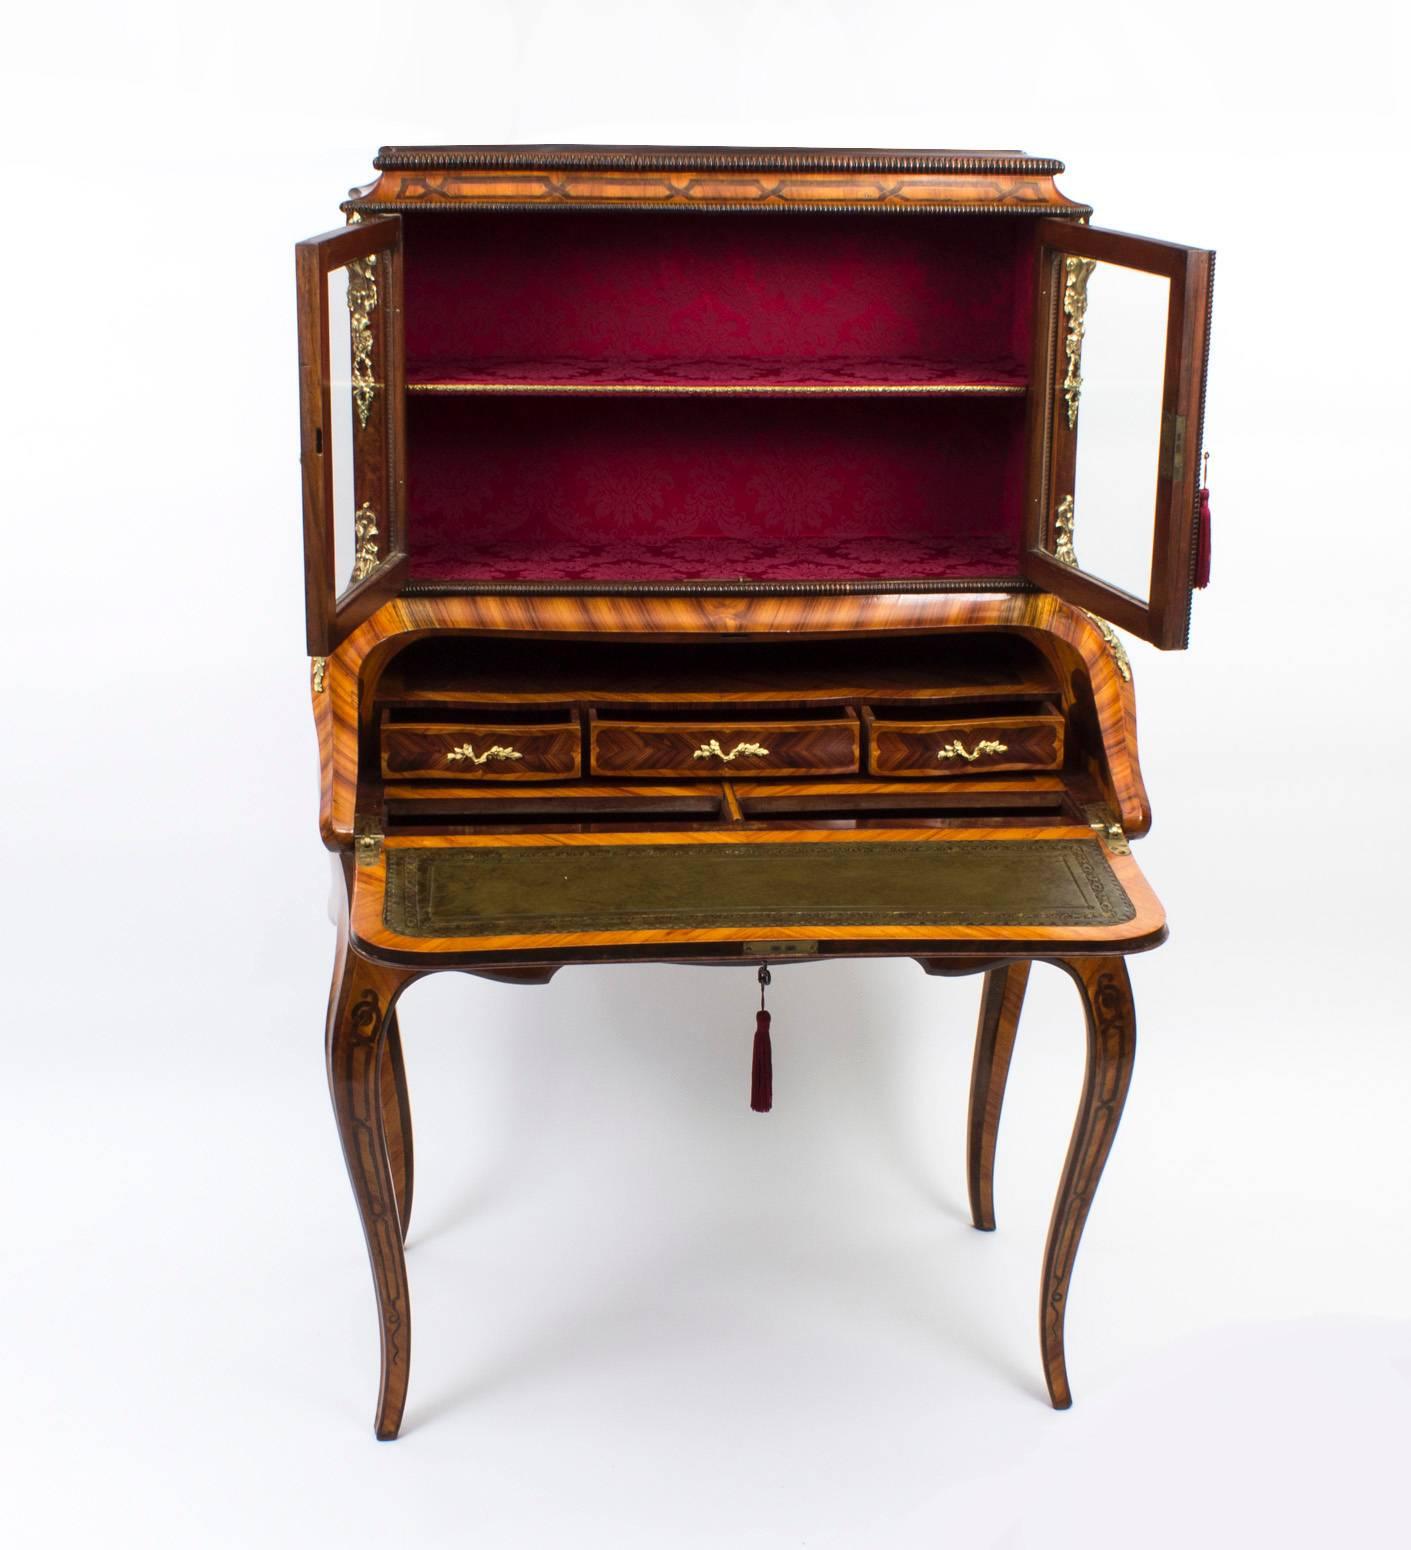 We are very pleased to be able to offer this rare antique French walnut and marquetry inlaid Bonheur du Jour, or Ladies Writing Desk, for sale.

Our experts have dated it to around 1850 and have assessed it as being in truly excellent condition, as